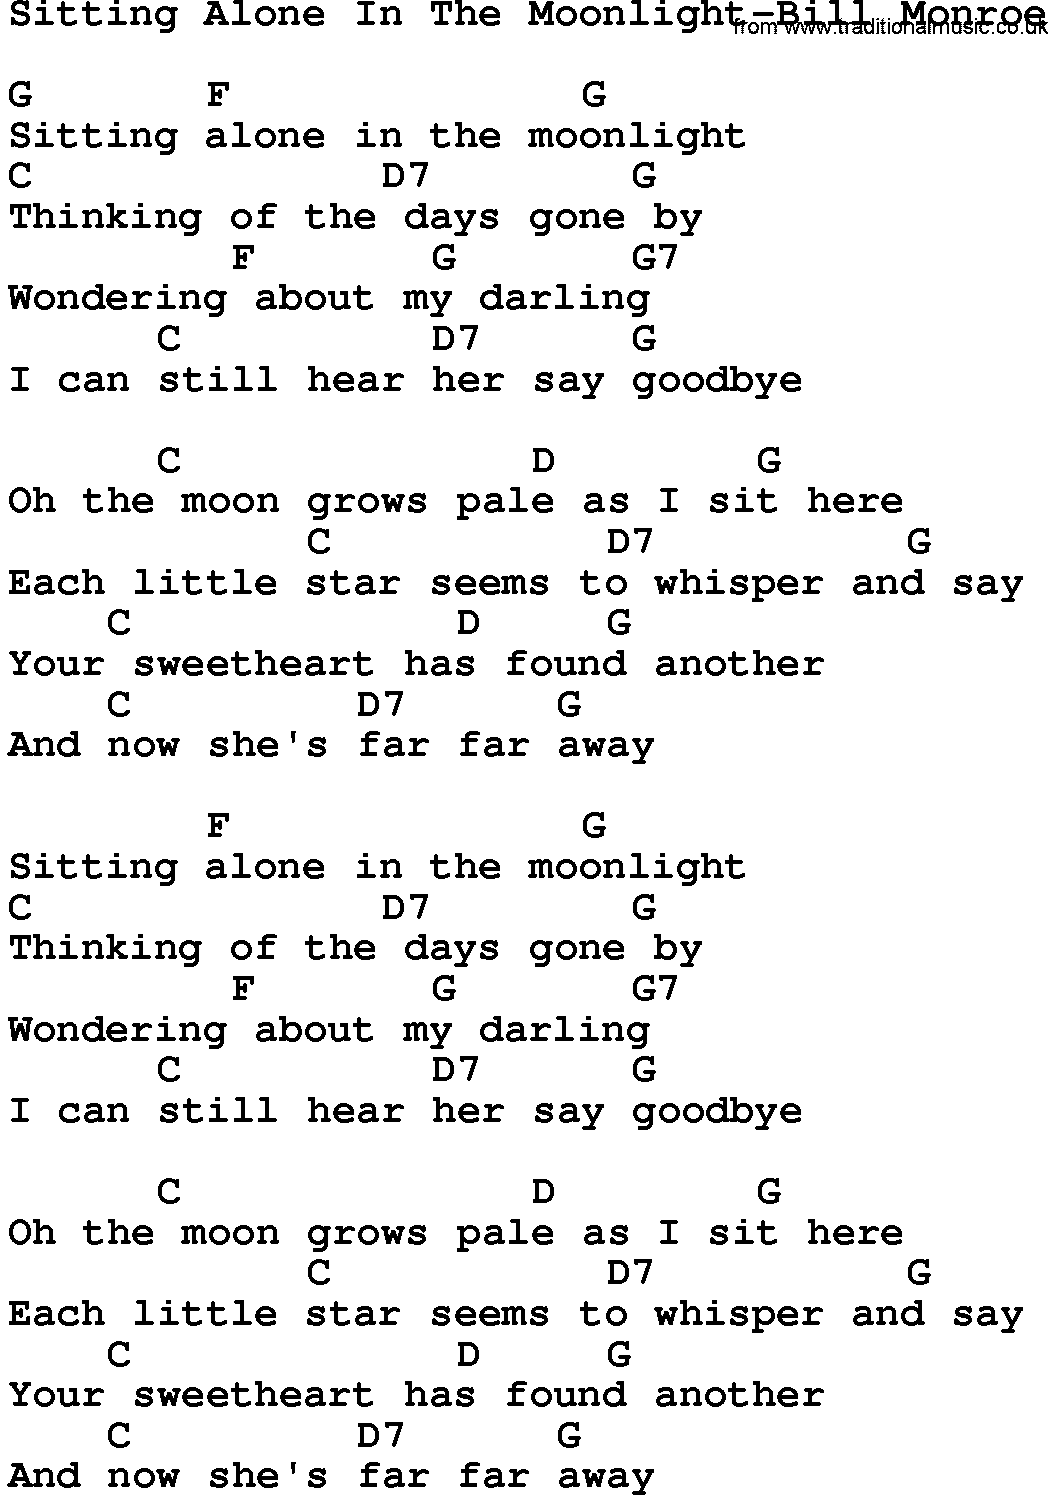 Country music song: Sitting Alone In The Moonlight-Bill Monroe lyrics and chords